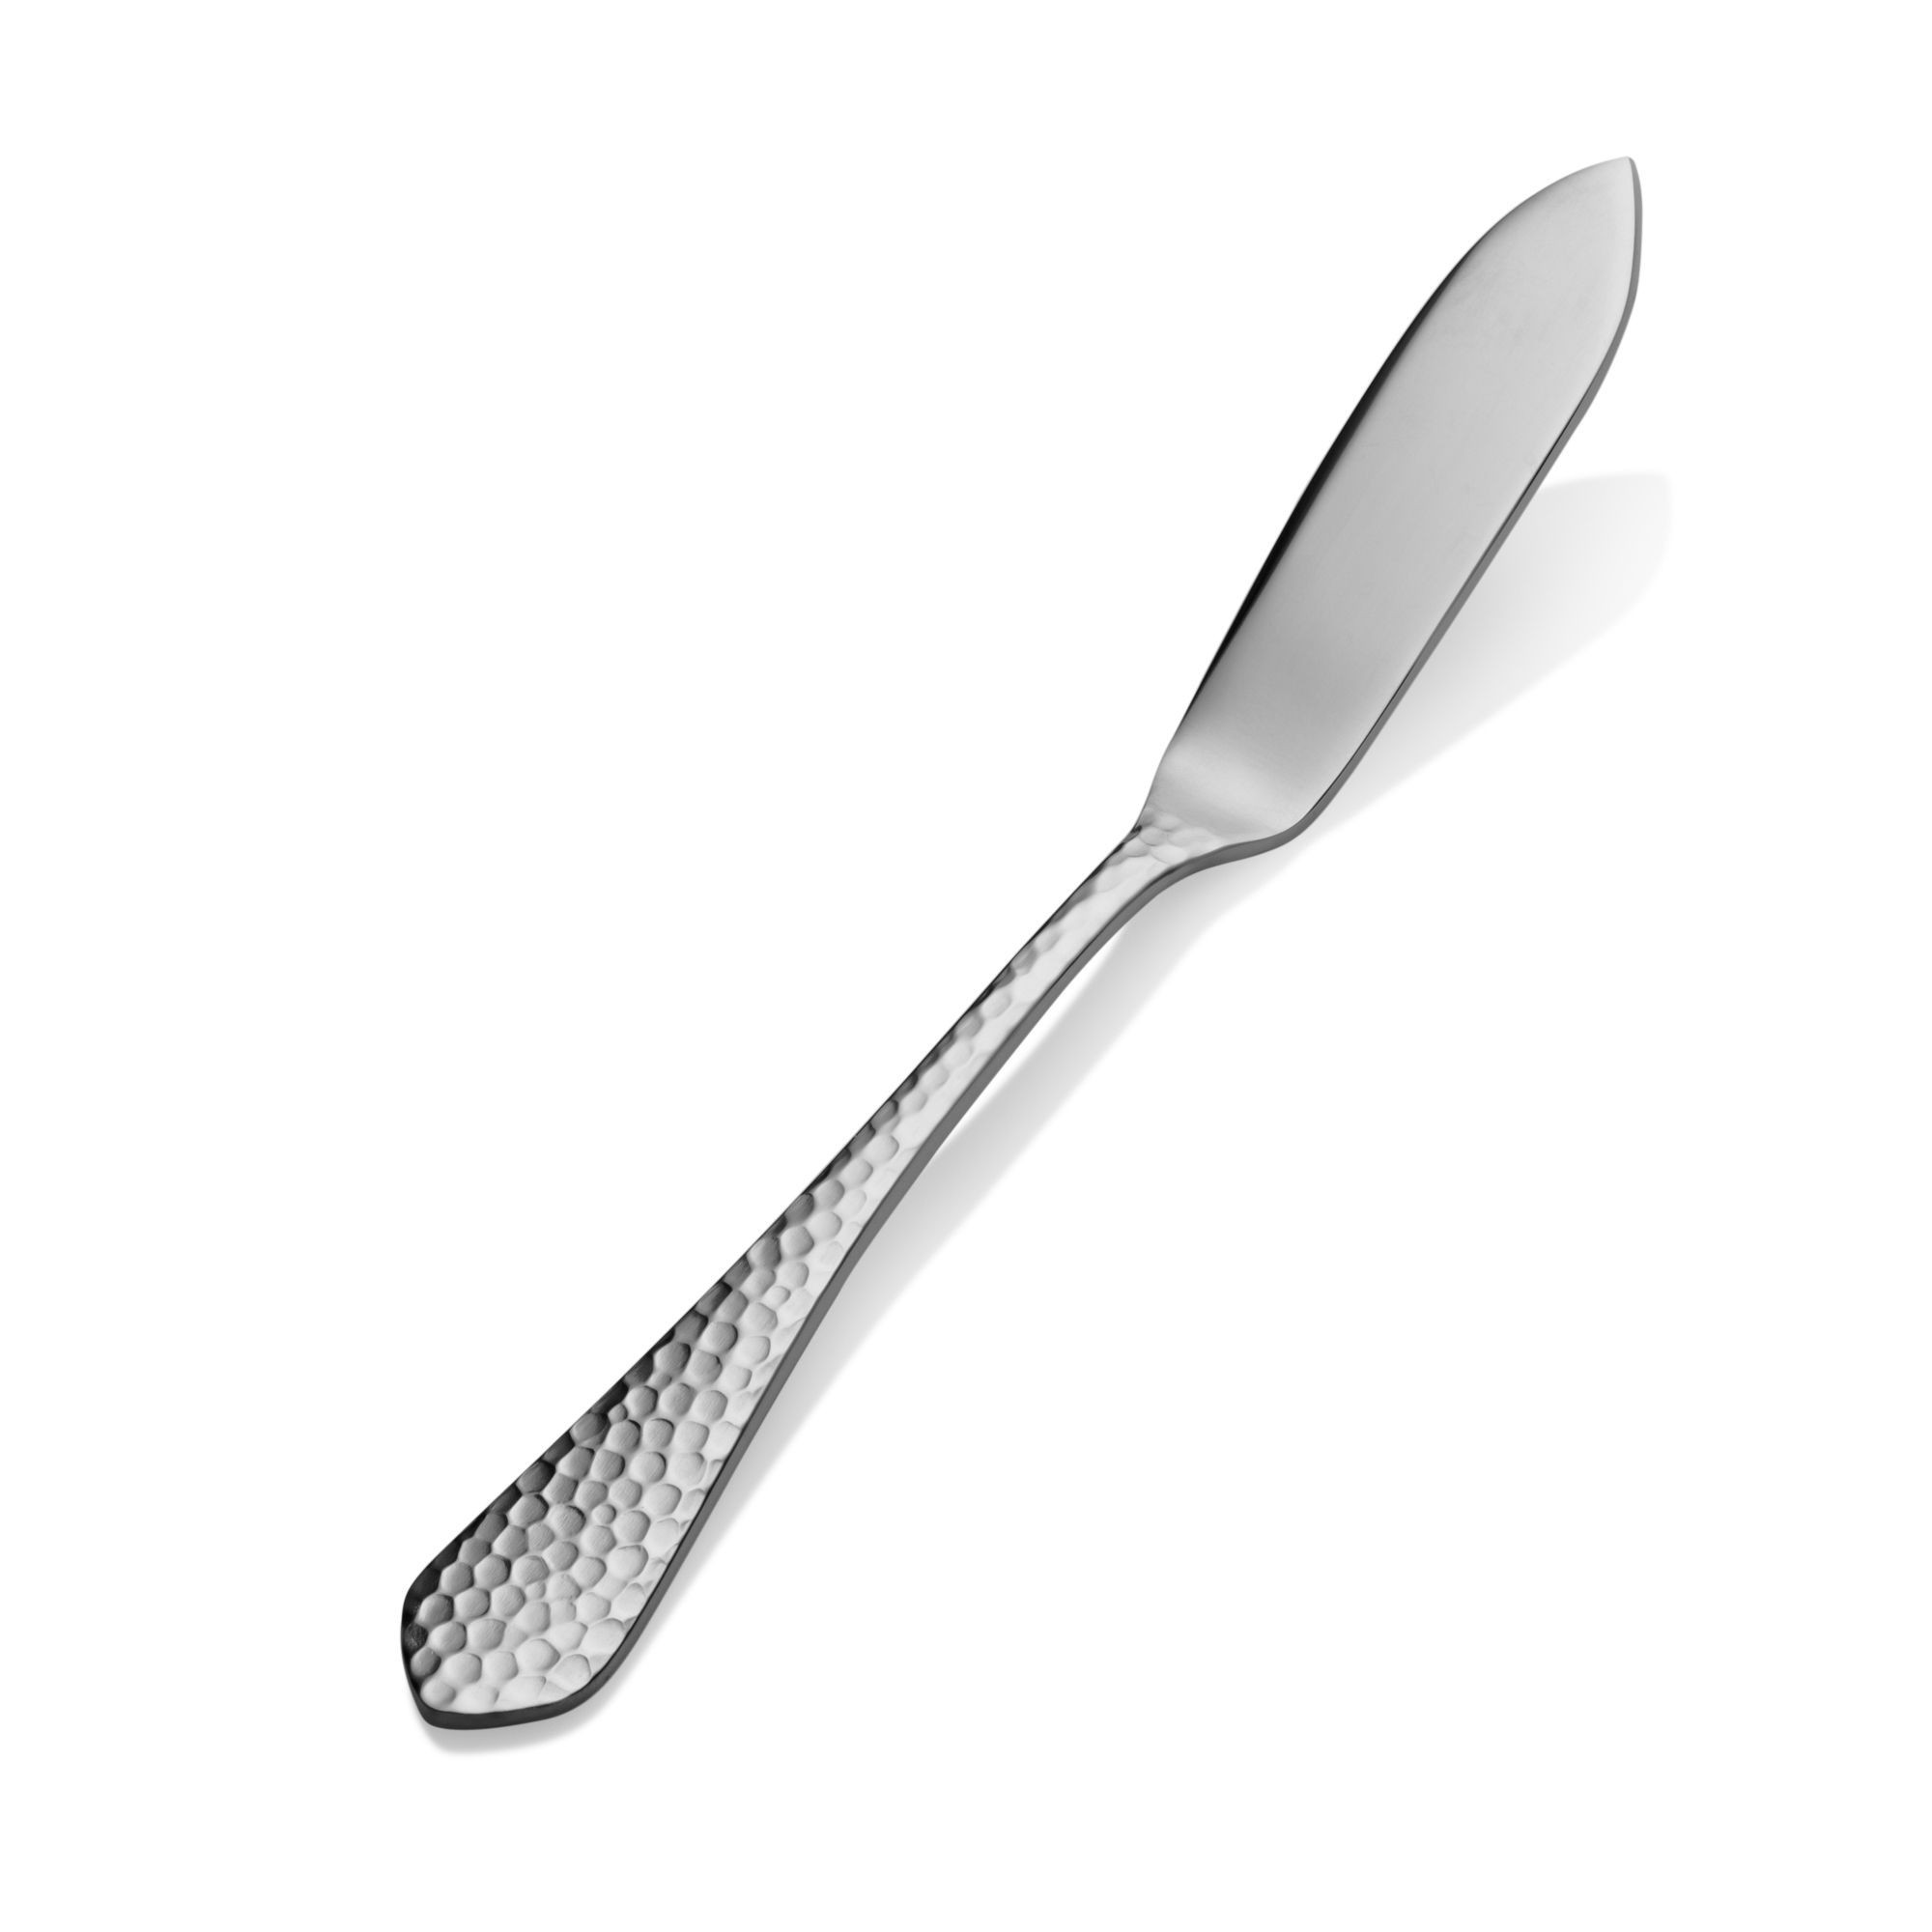 Bon Chef S1213S Reflections 18/8 Stainless Steel Silverplated Flat Handle Butter Spreader